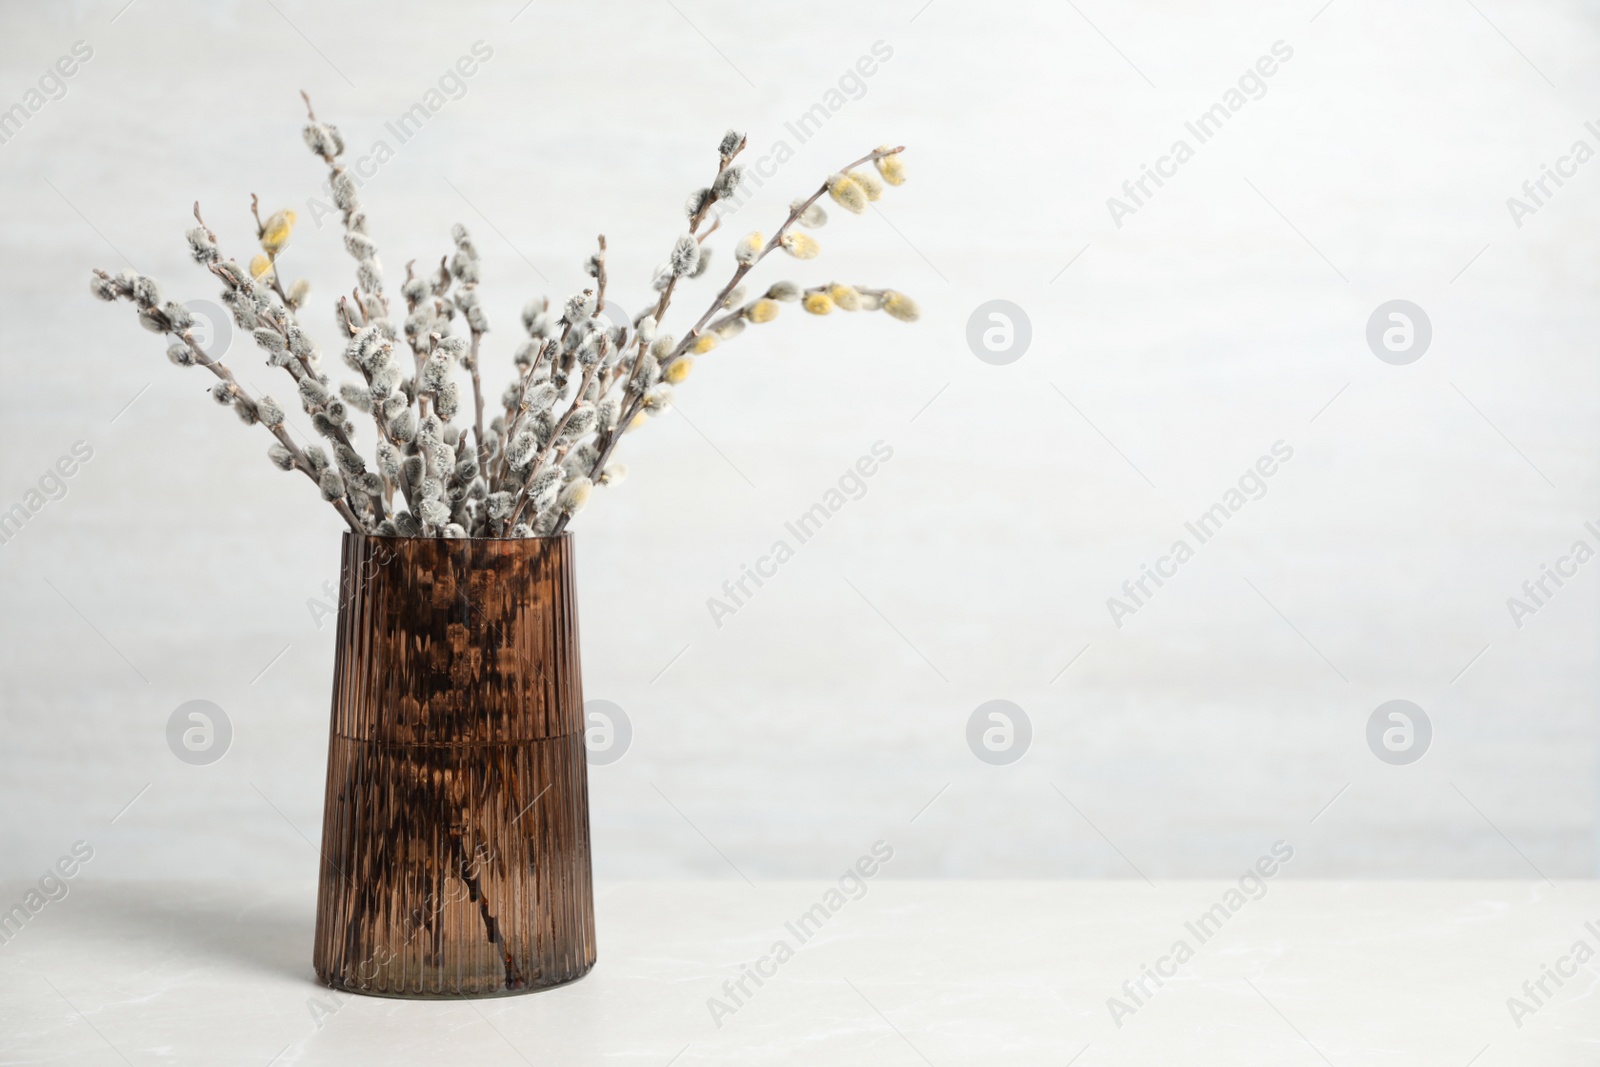 Photo of Beautiful pussy willow branches in glass vase on white table, space for text